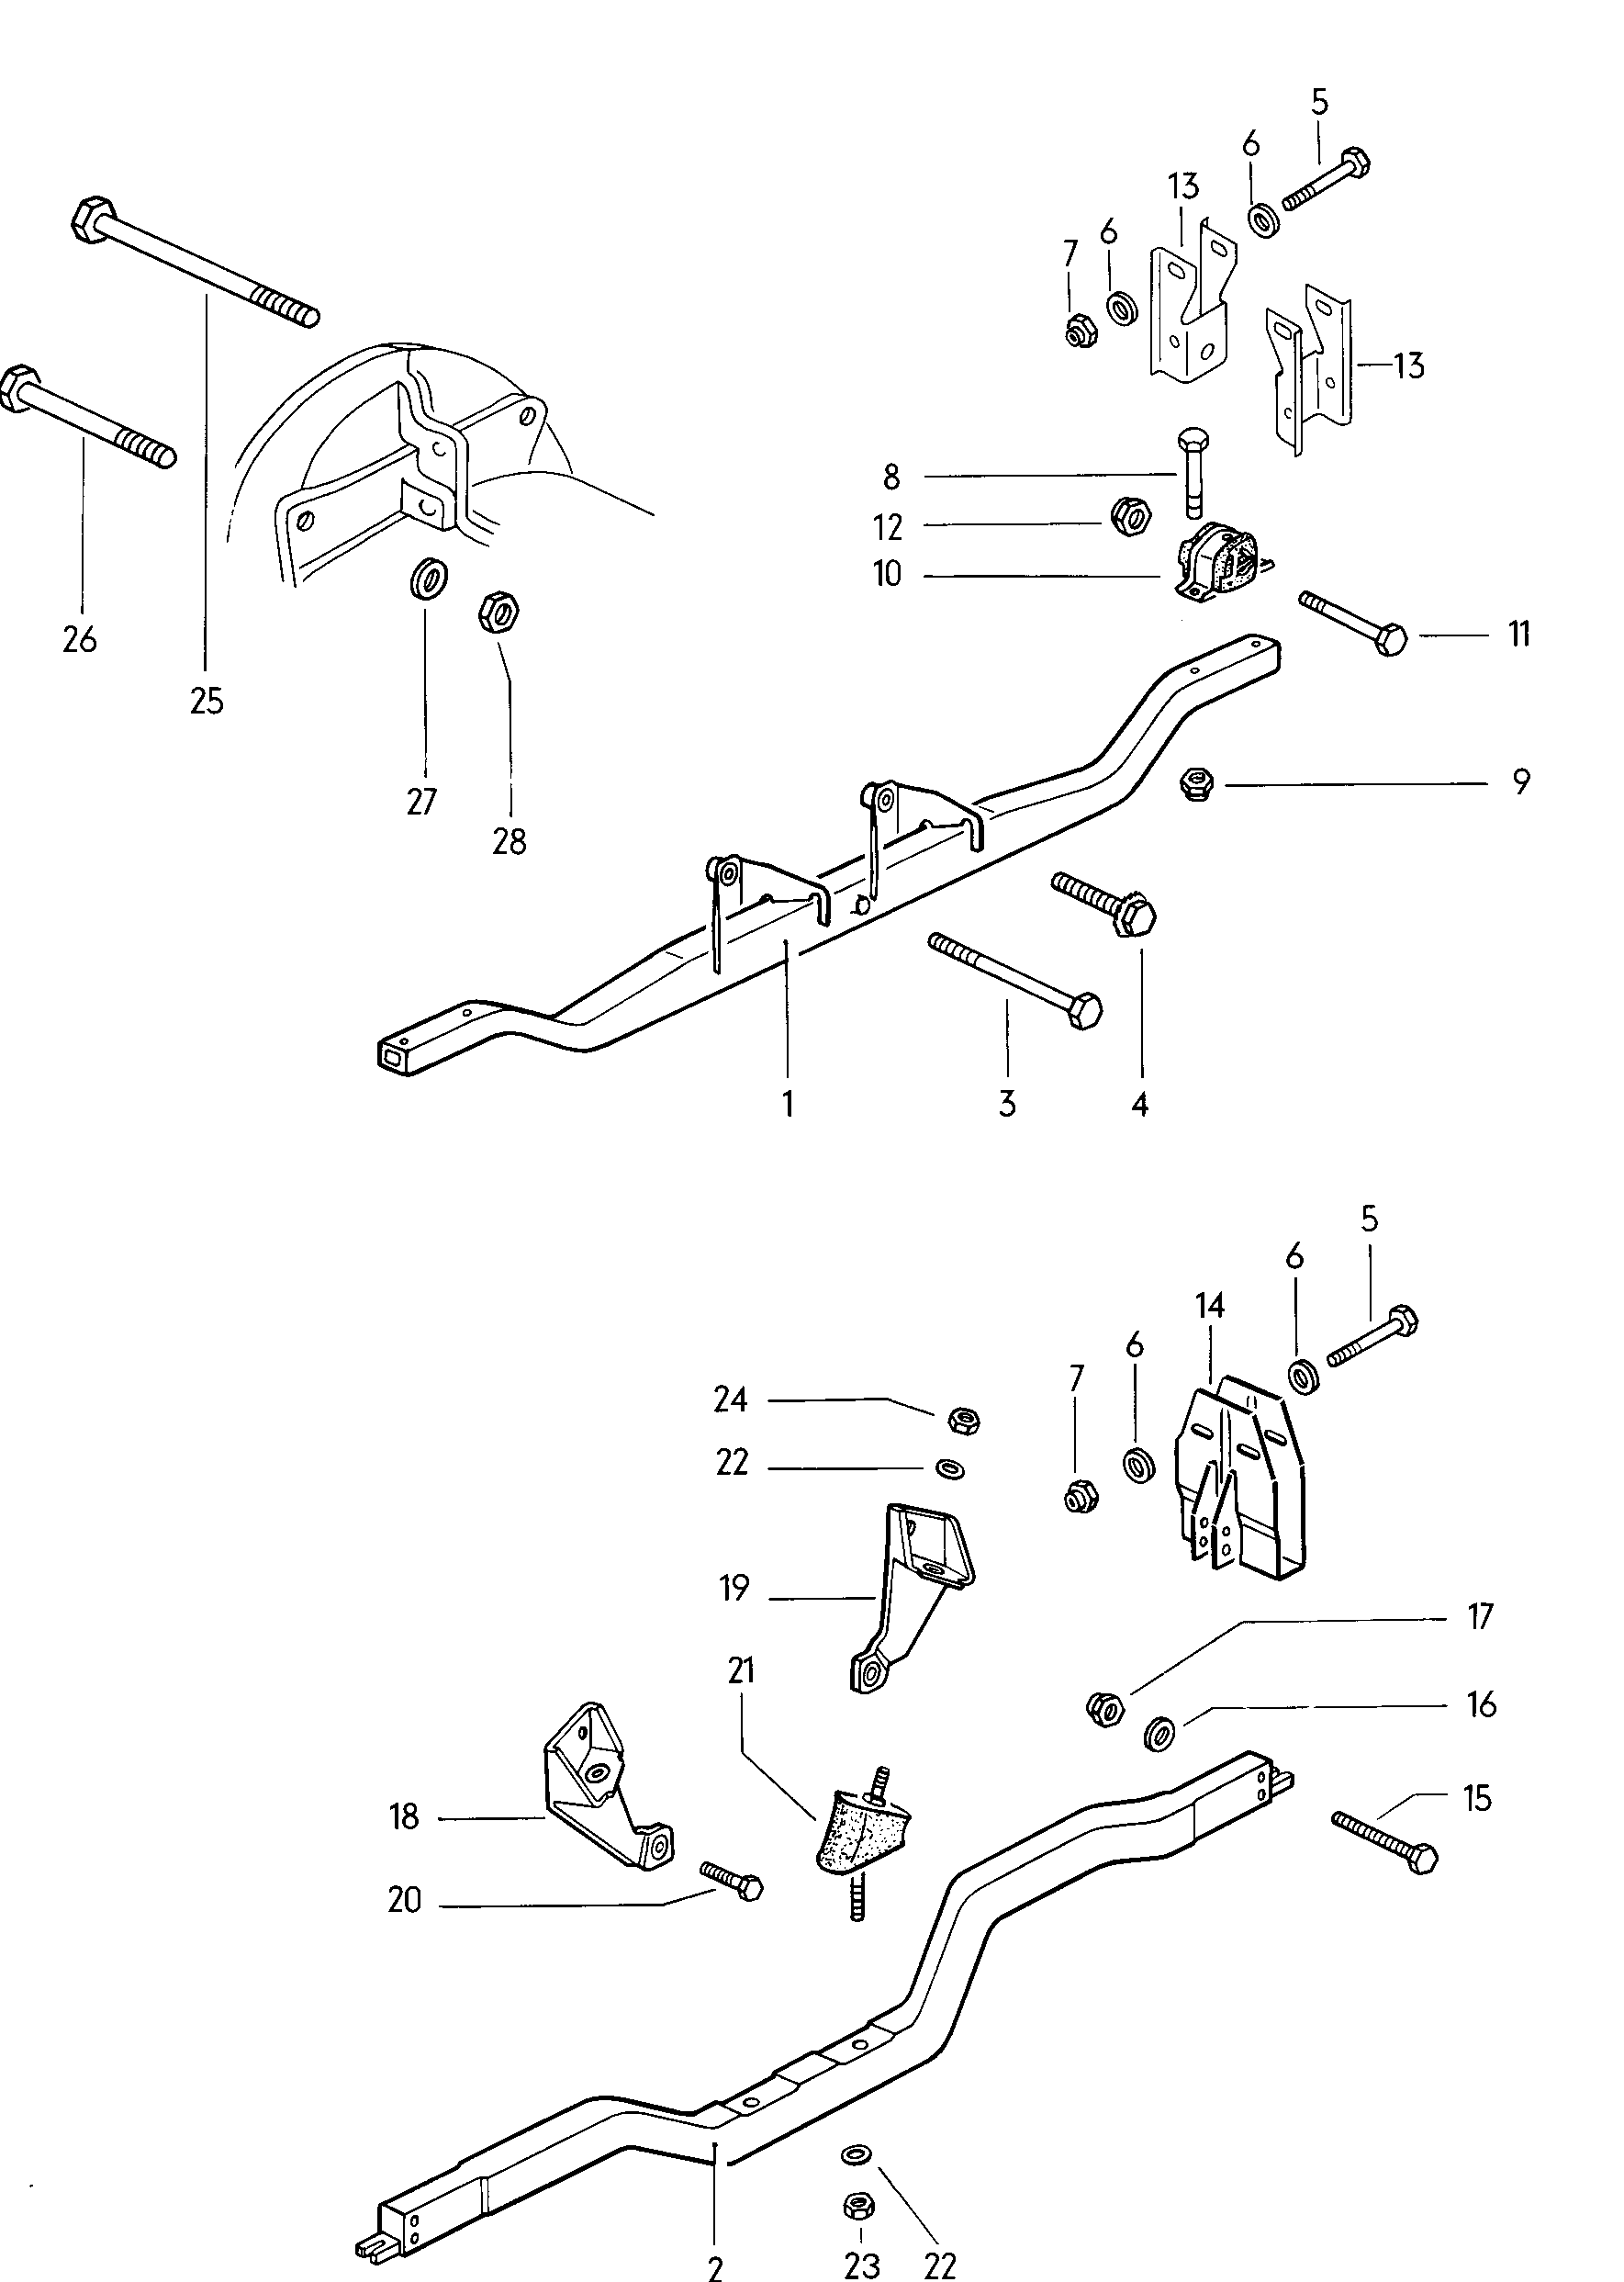 securing parts for engine - Typ 2/syncro(T2)  